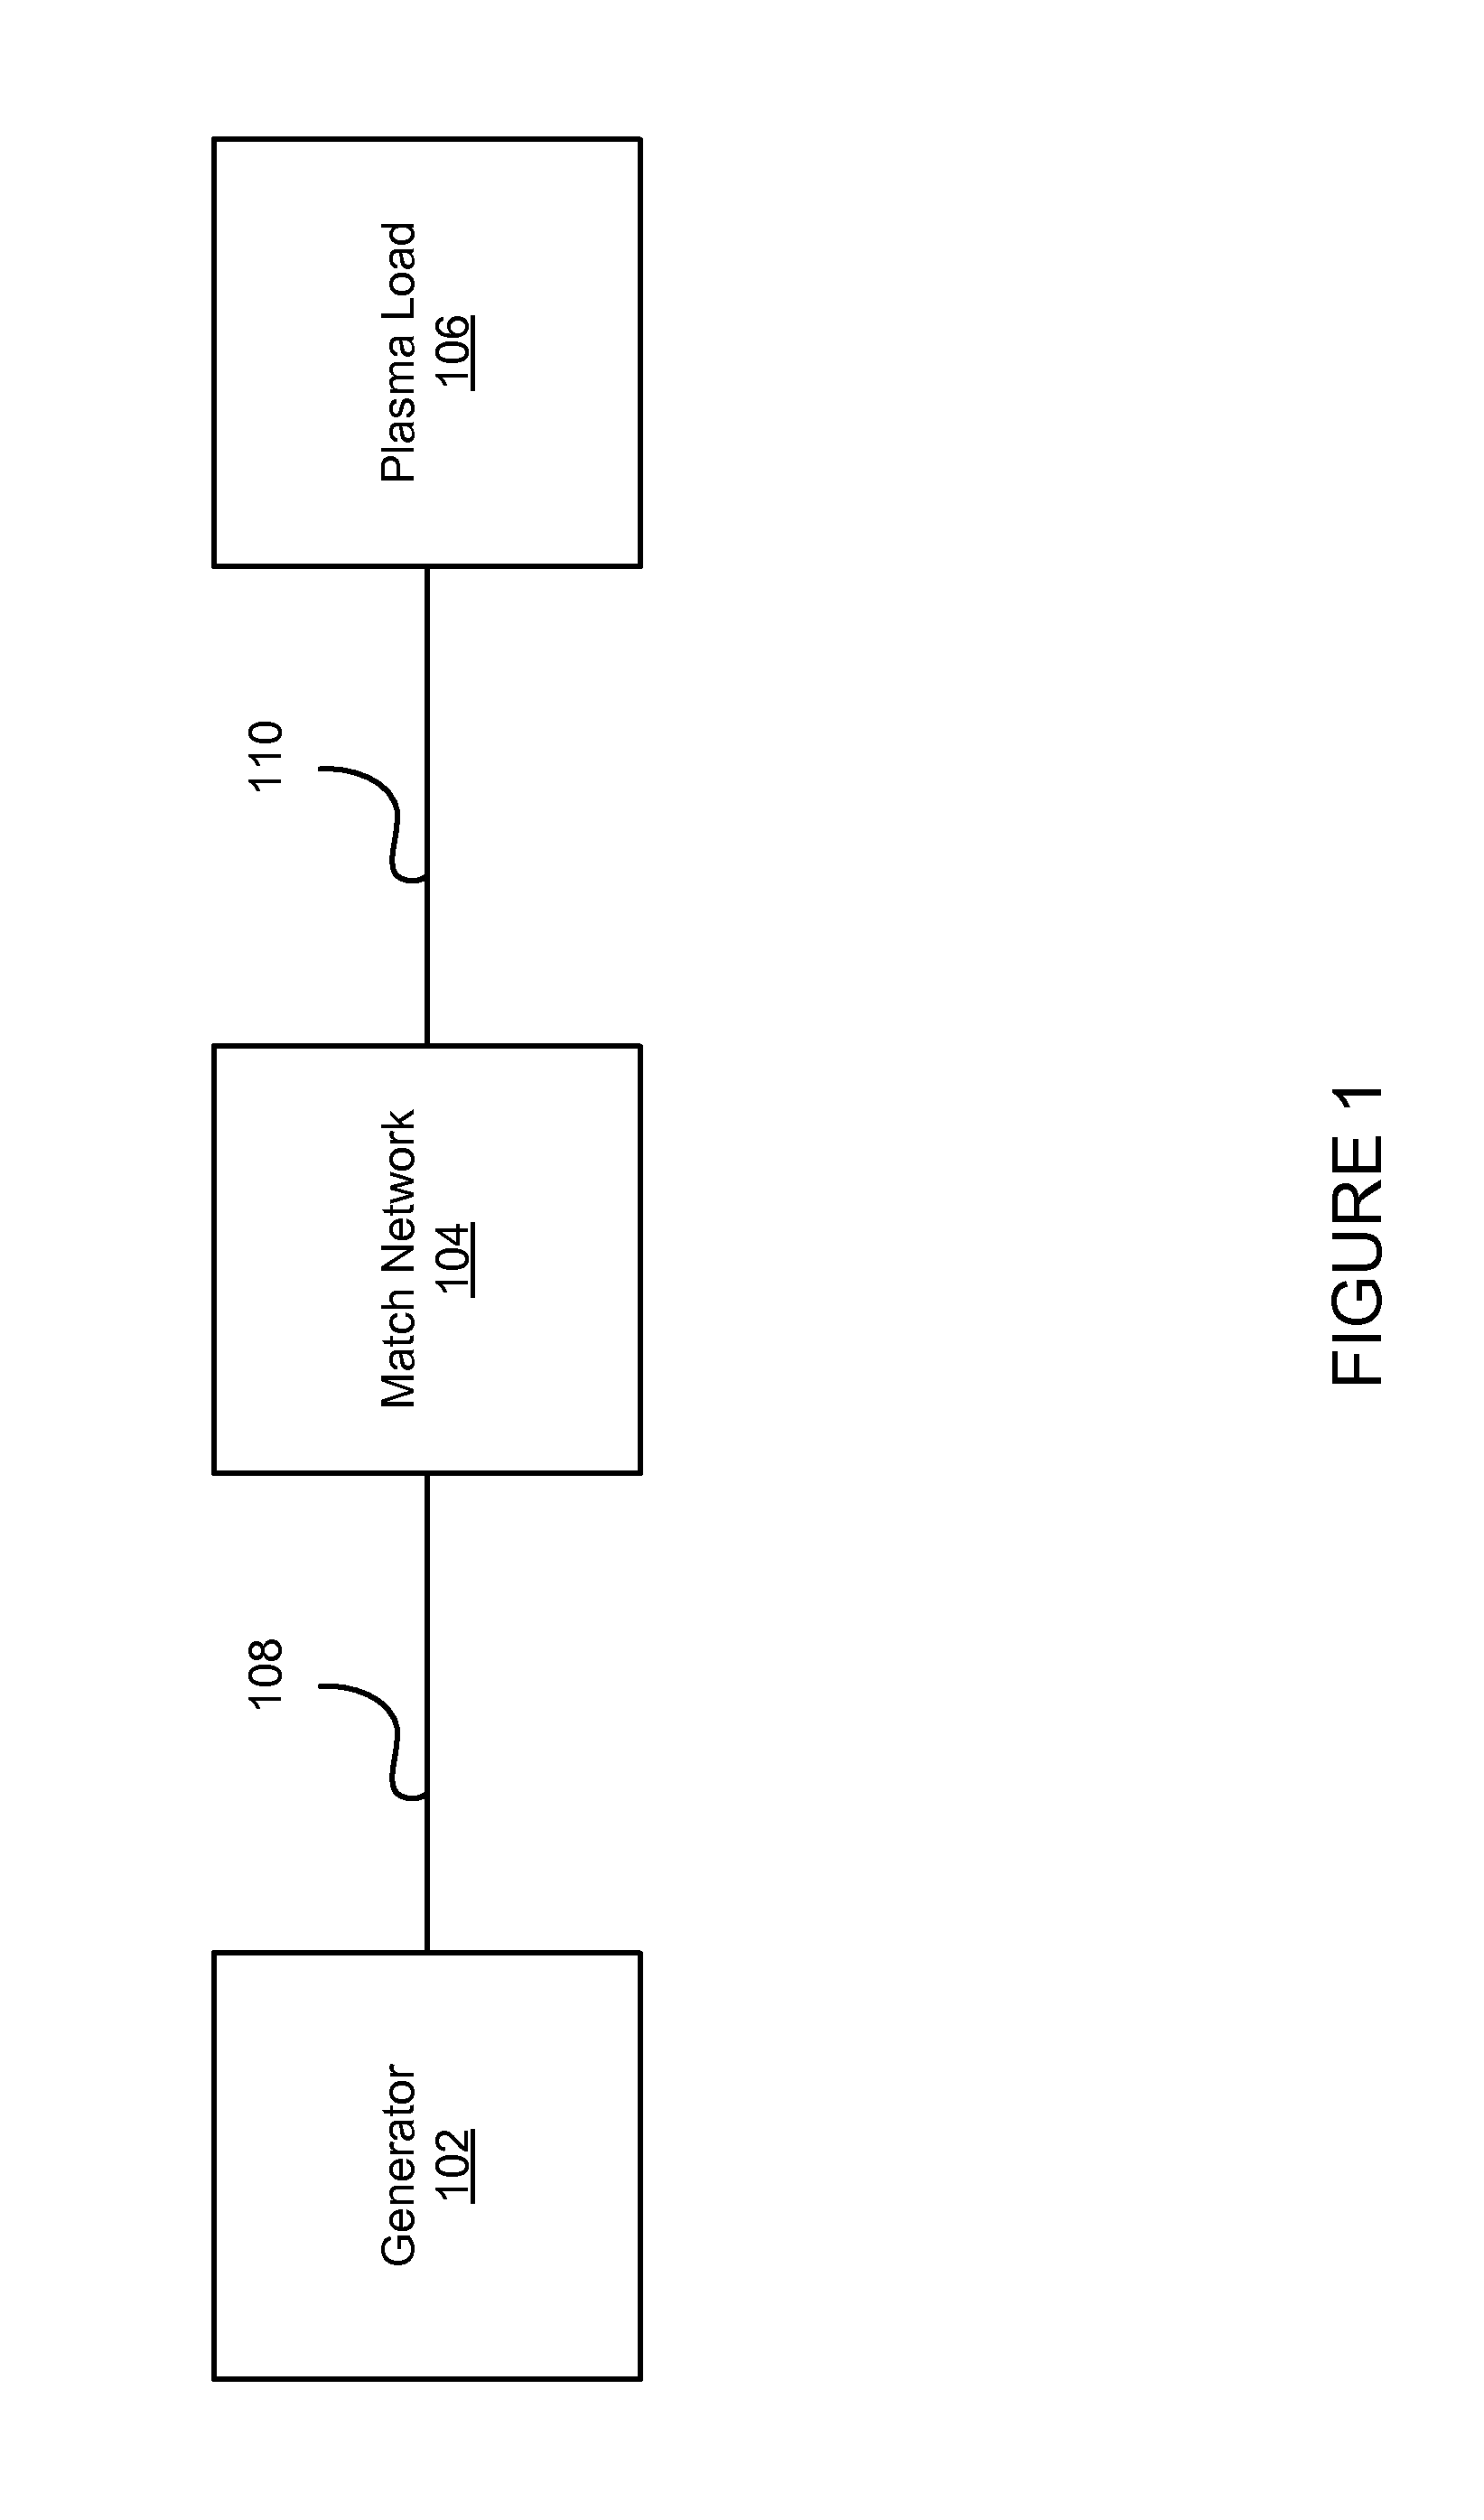 High frequency solid state switching for impedance matching